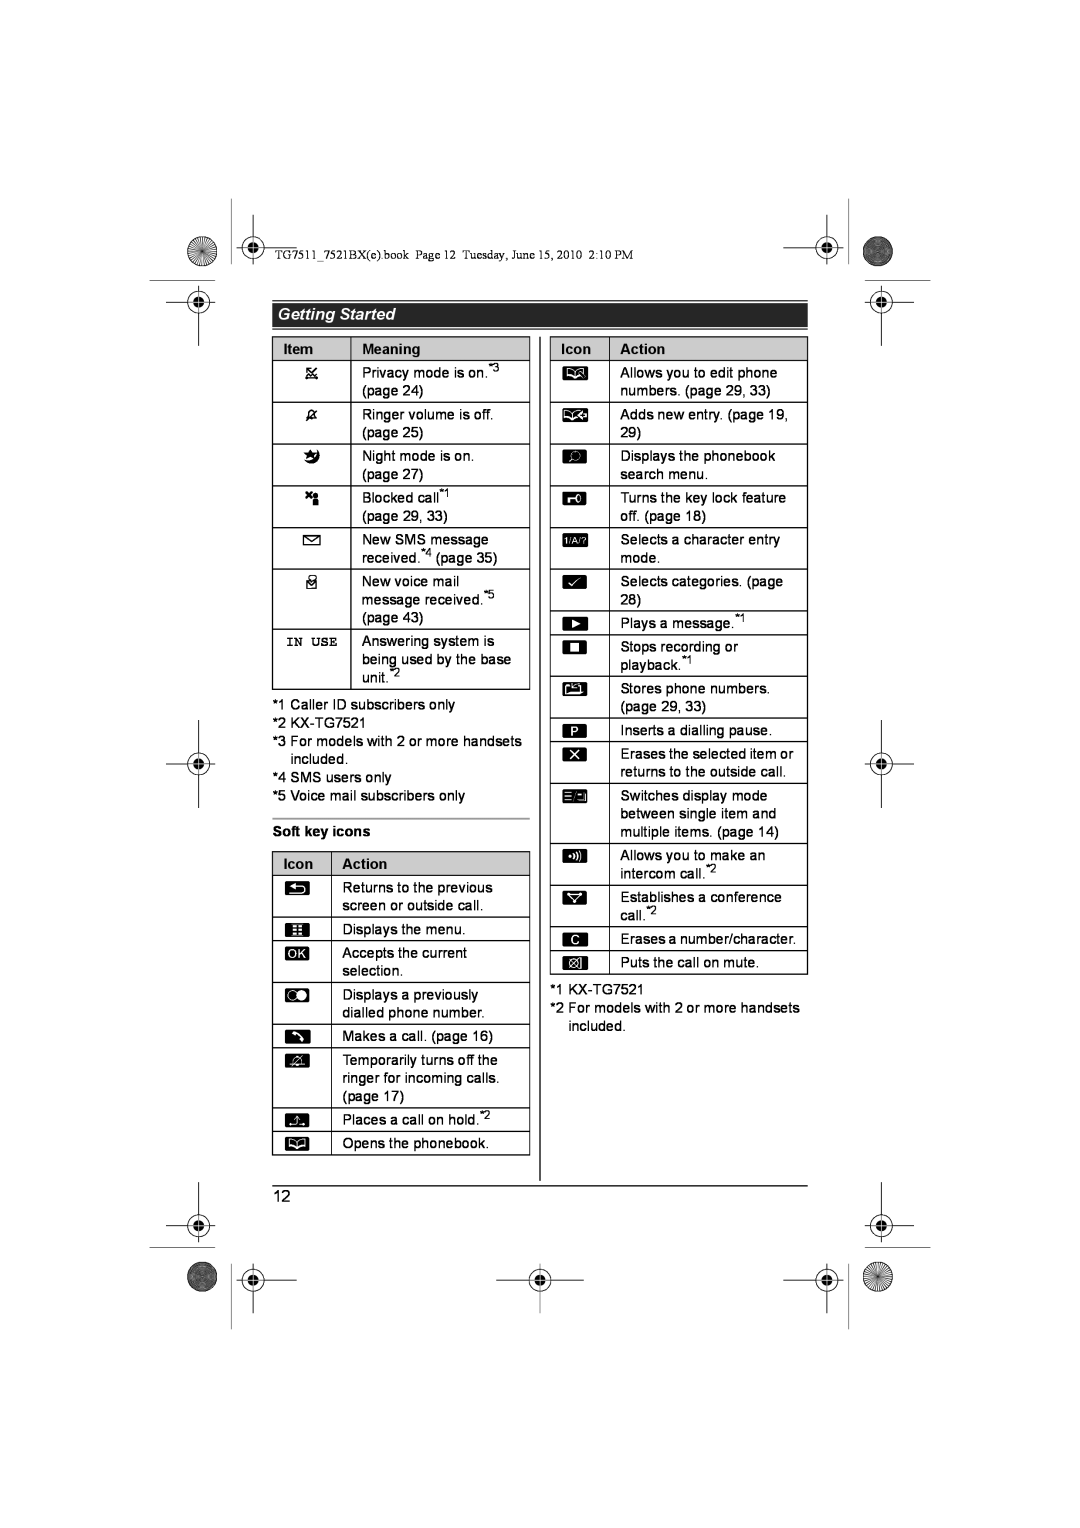 Panasonic KX-TG7521BX, KX-TG7511 operating instructions Soft key icons, Action, Getting Started, Meaning, Icon 